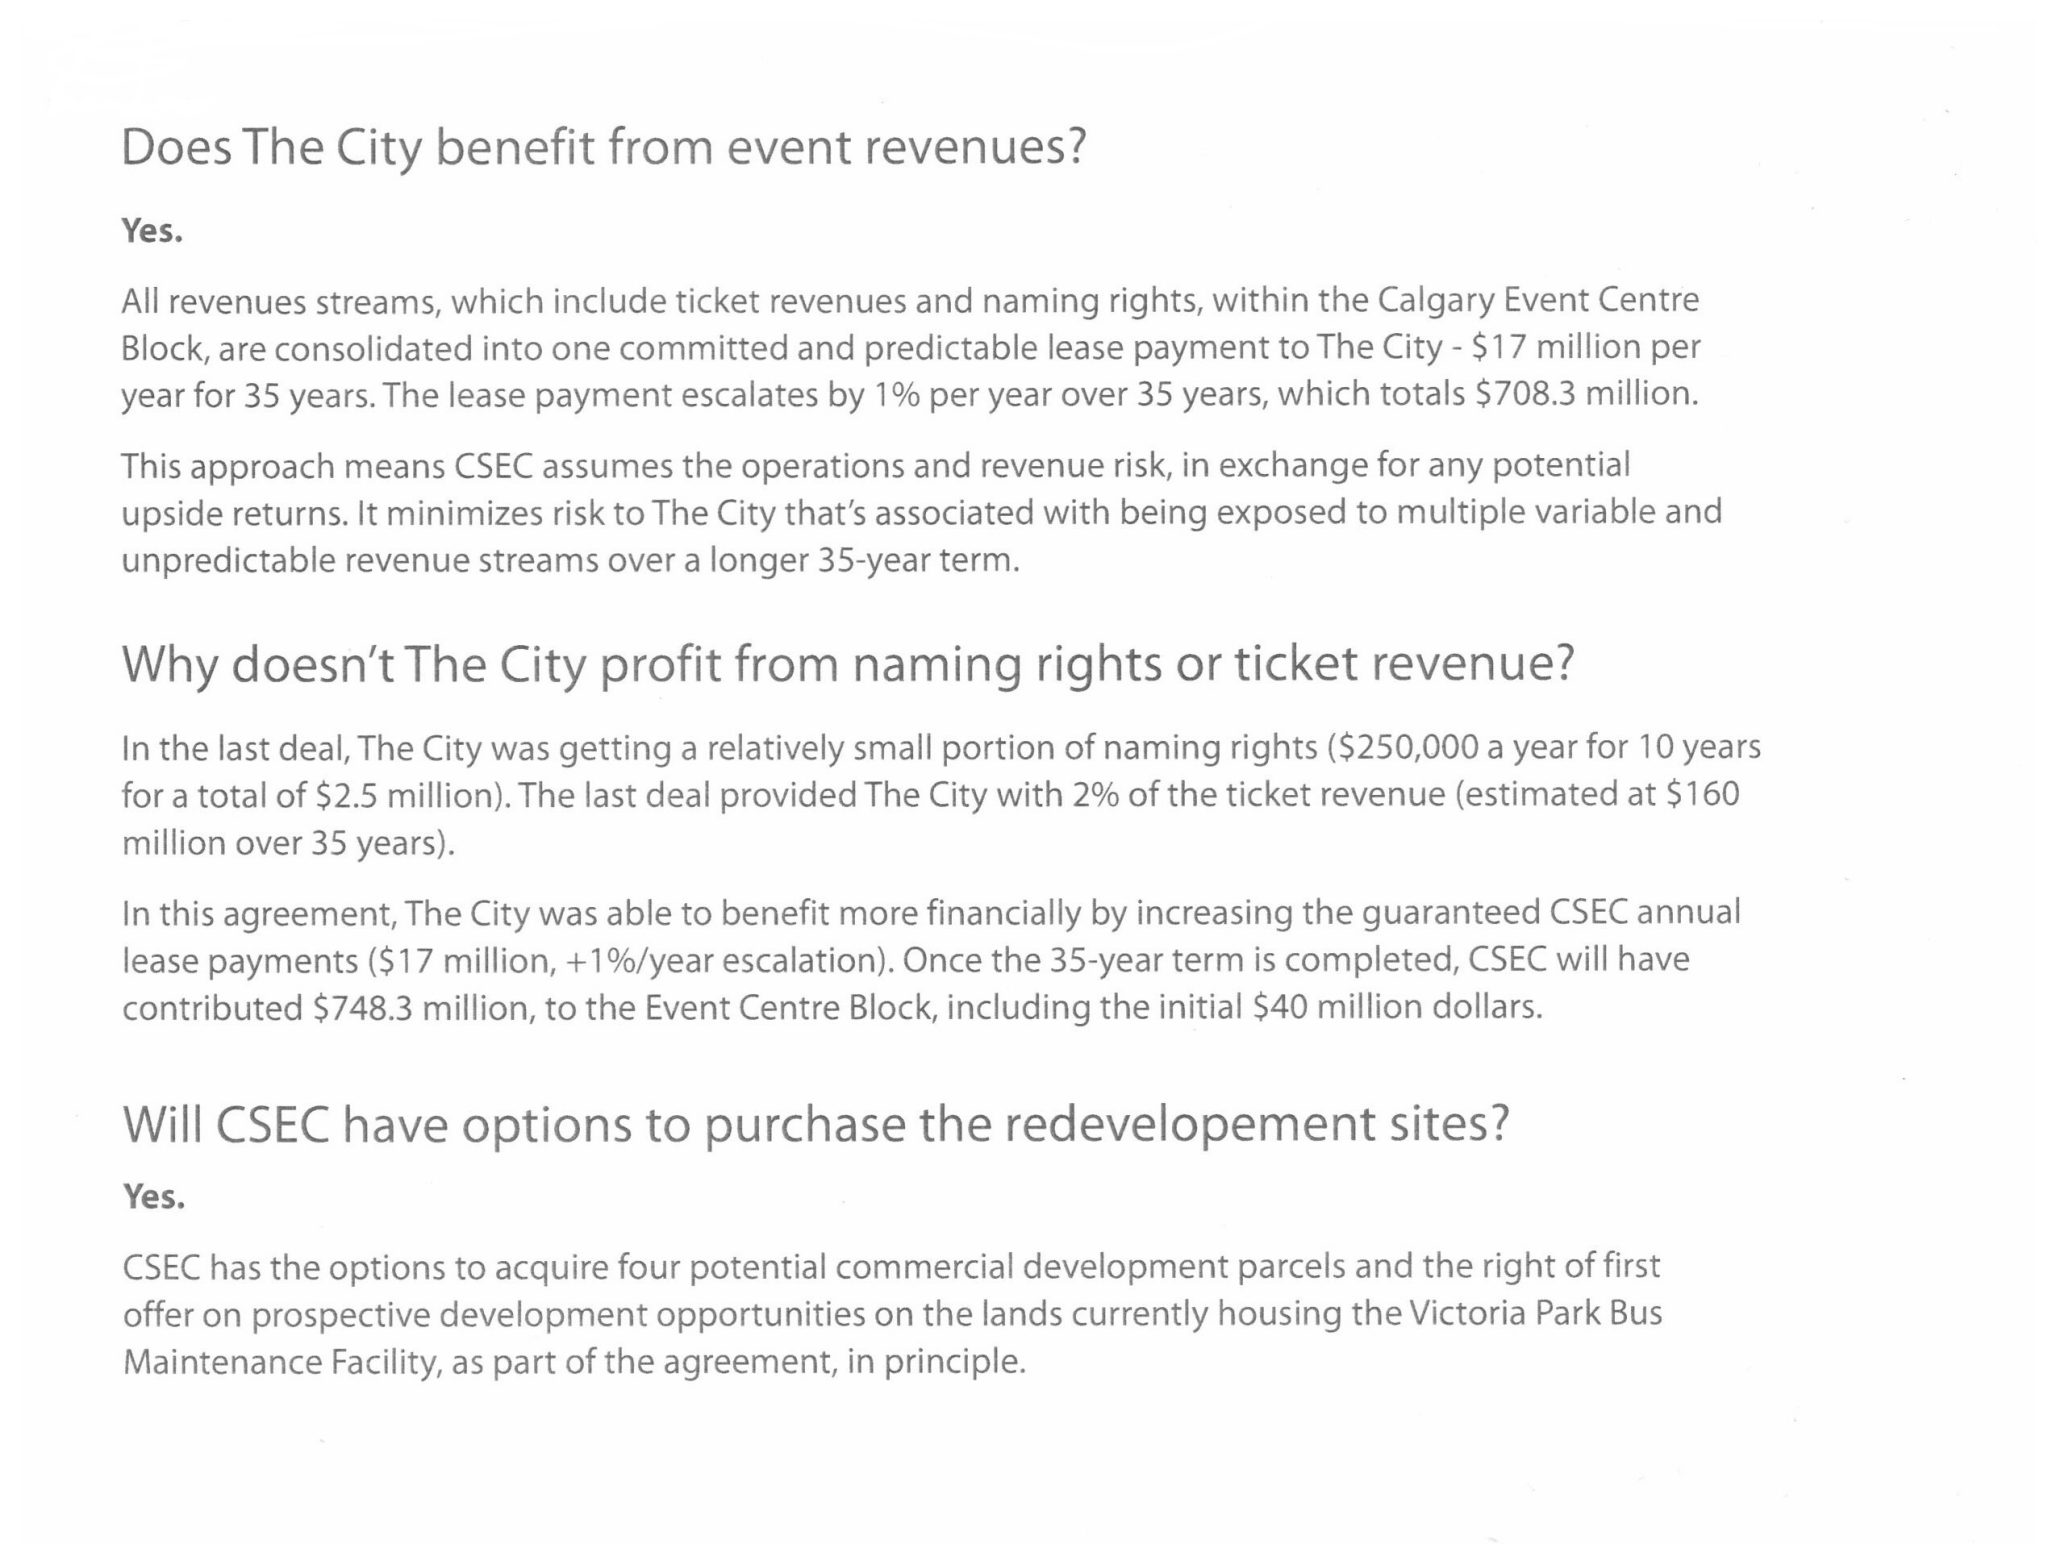 Questions asking if the City will benefit from event revenues, Why the City doesn't profit from naming rights or ticket revenues, and if CSEC will have options to purchase the redevelopment sites